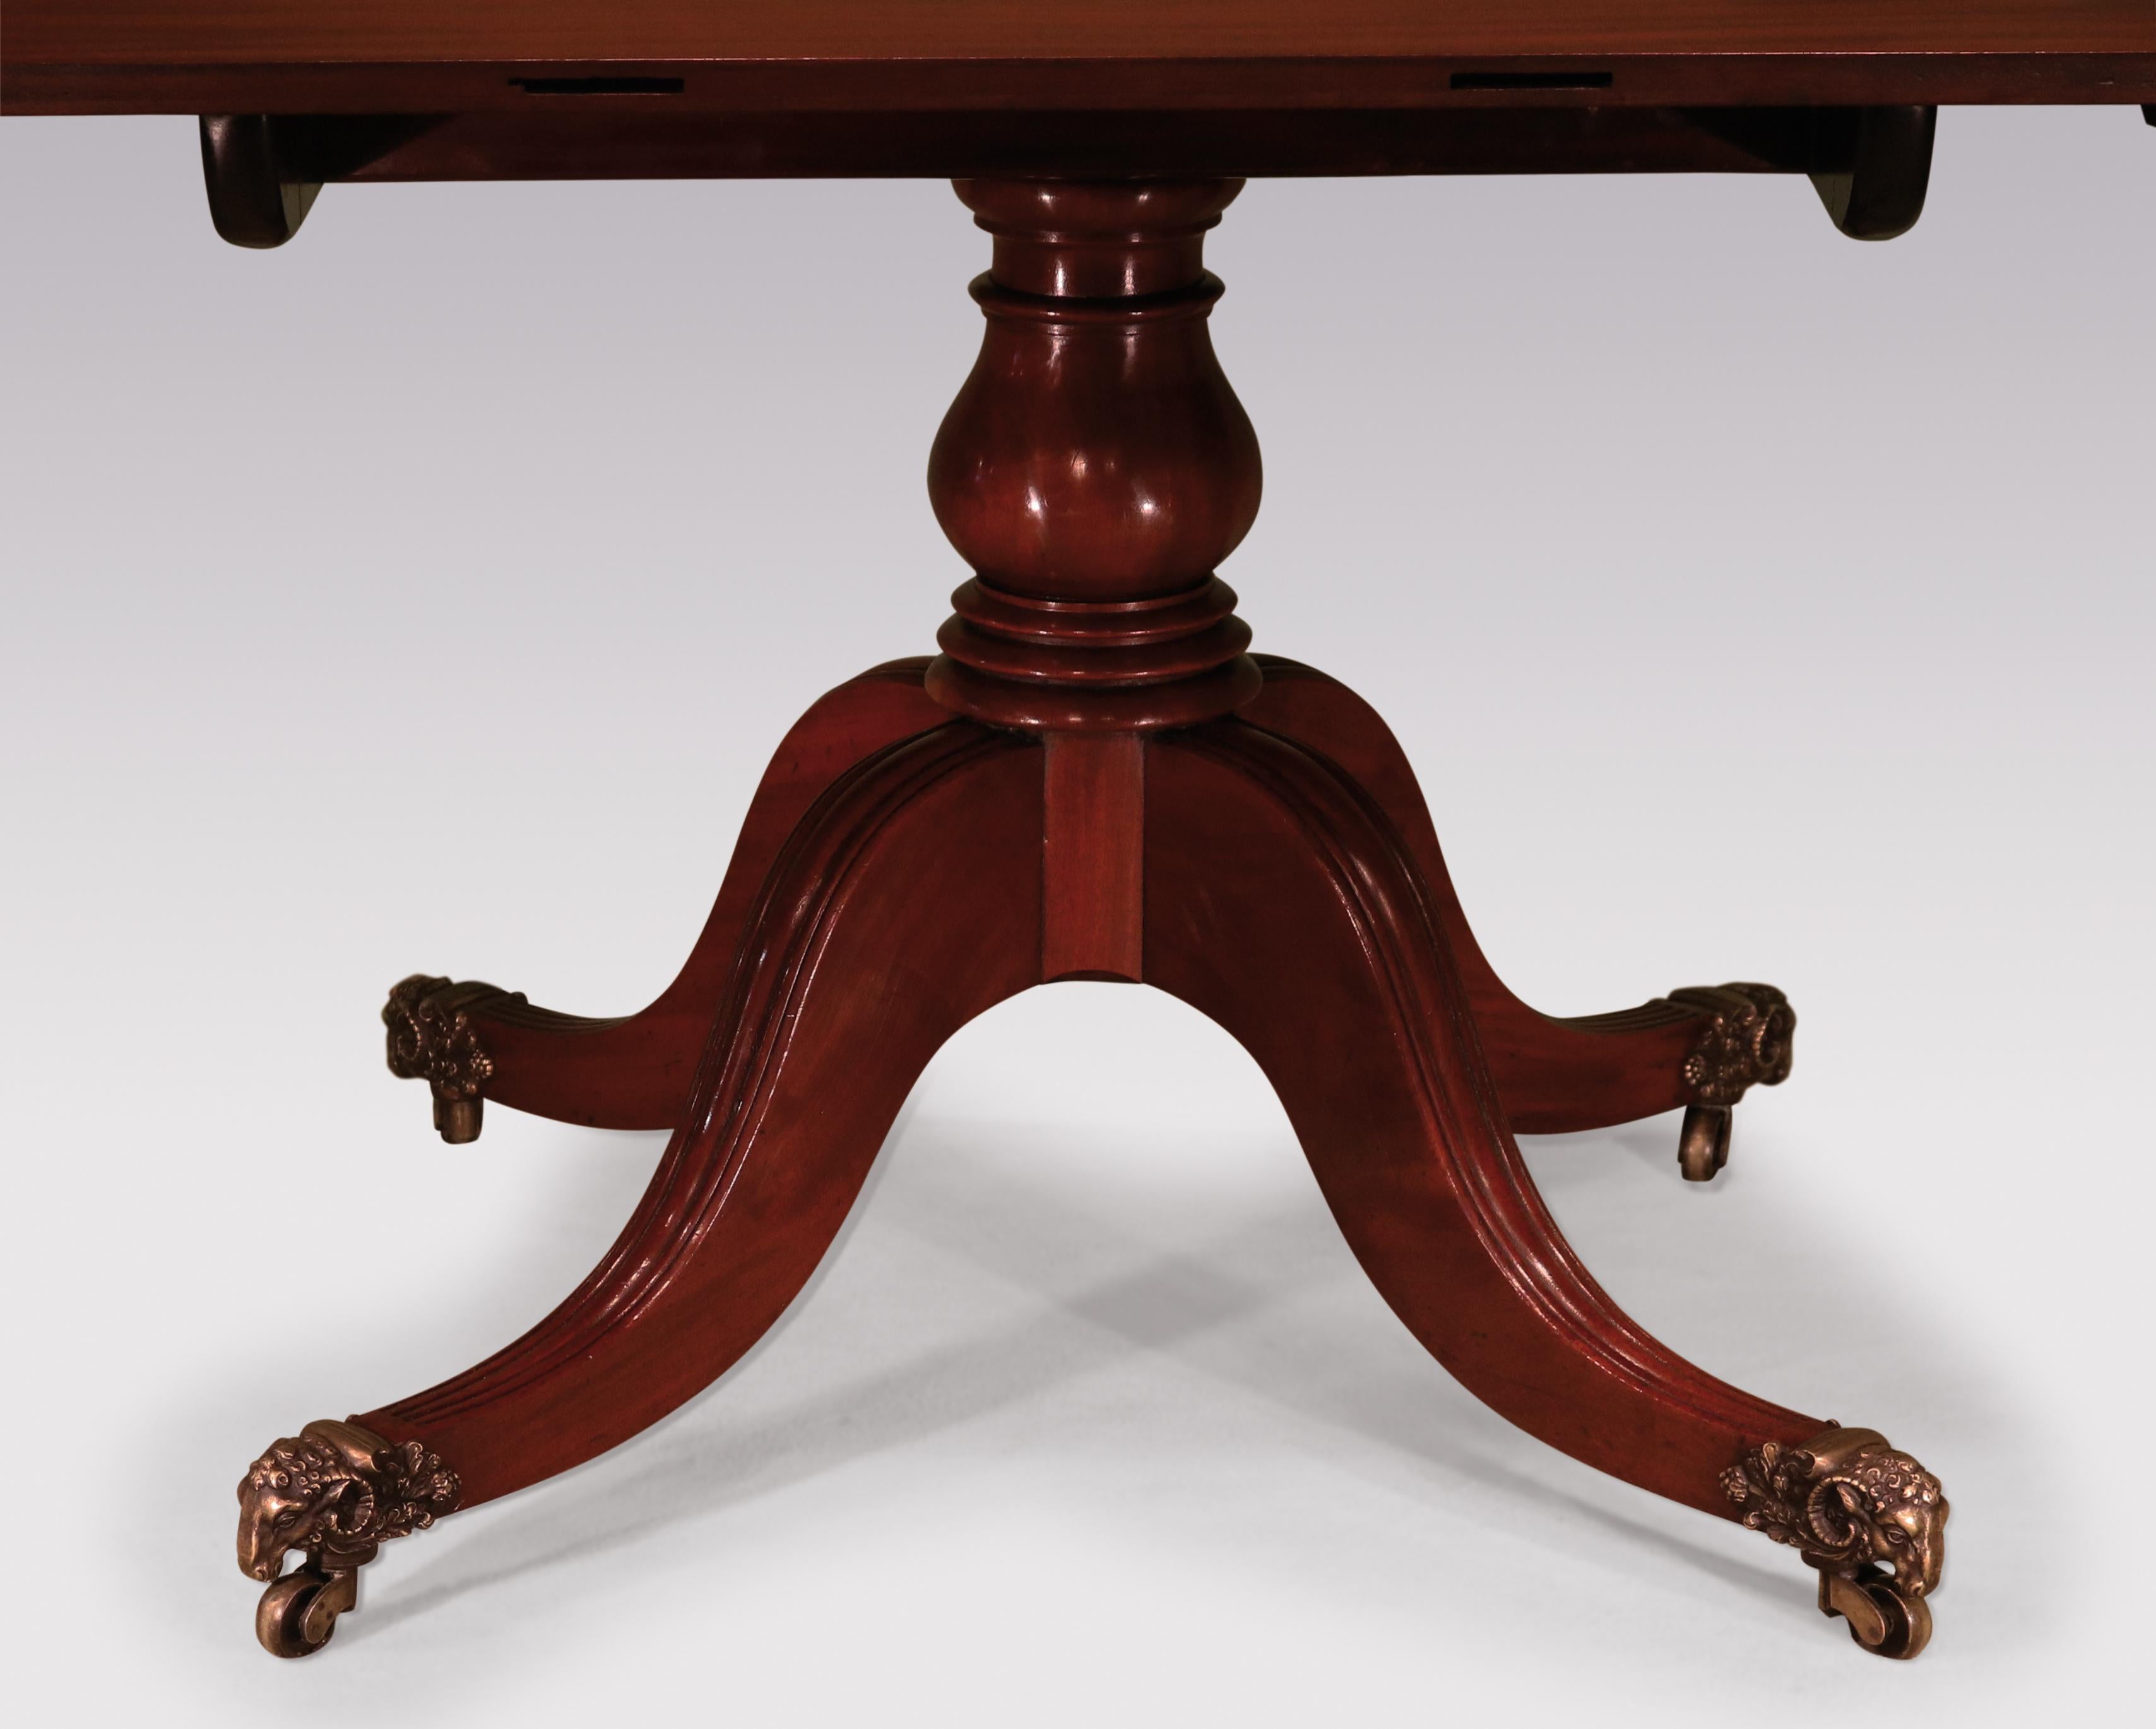 English Regency Period Mahogany Two Pillar Dining Room Table For Sale